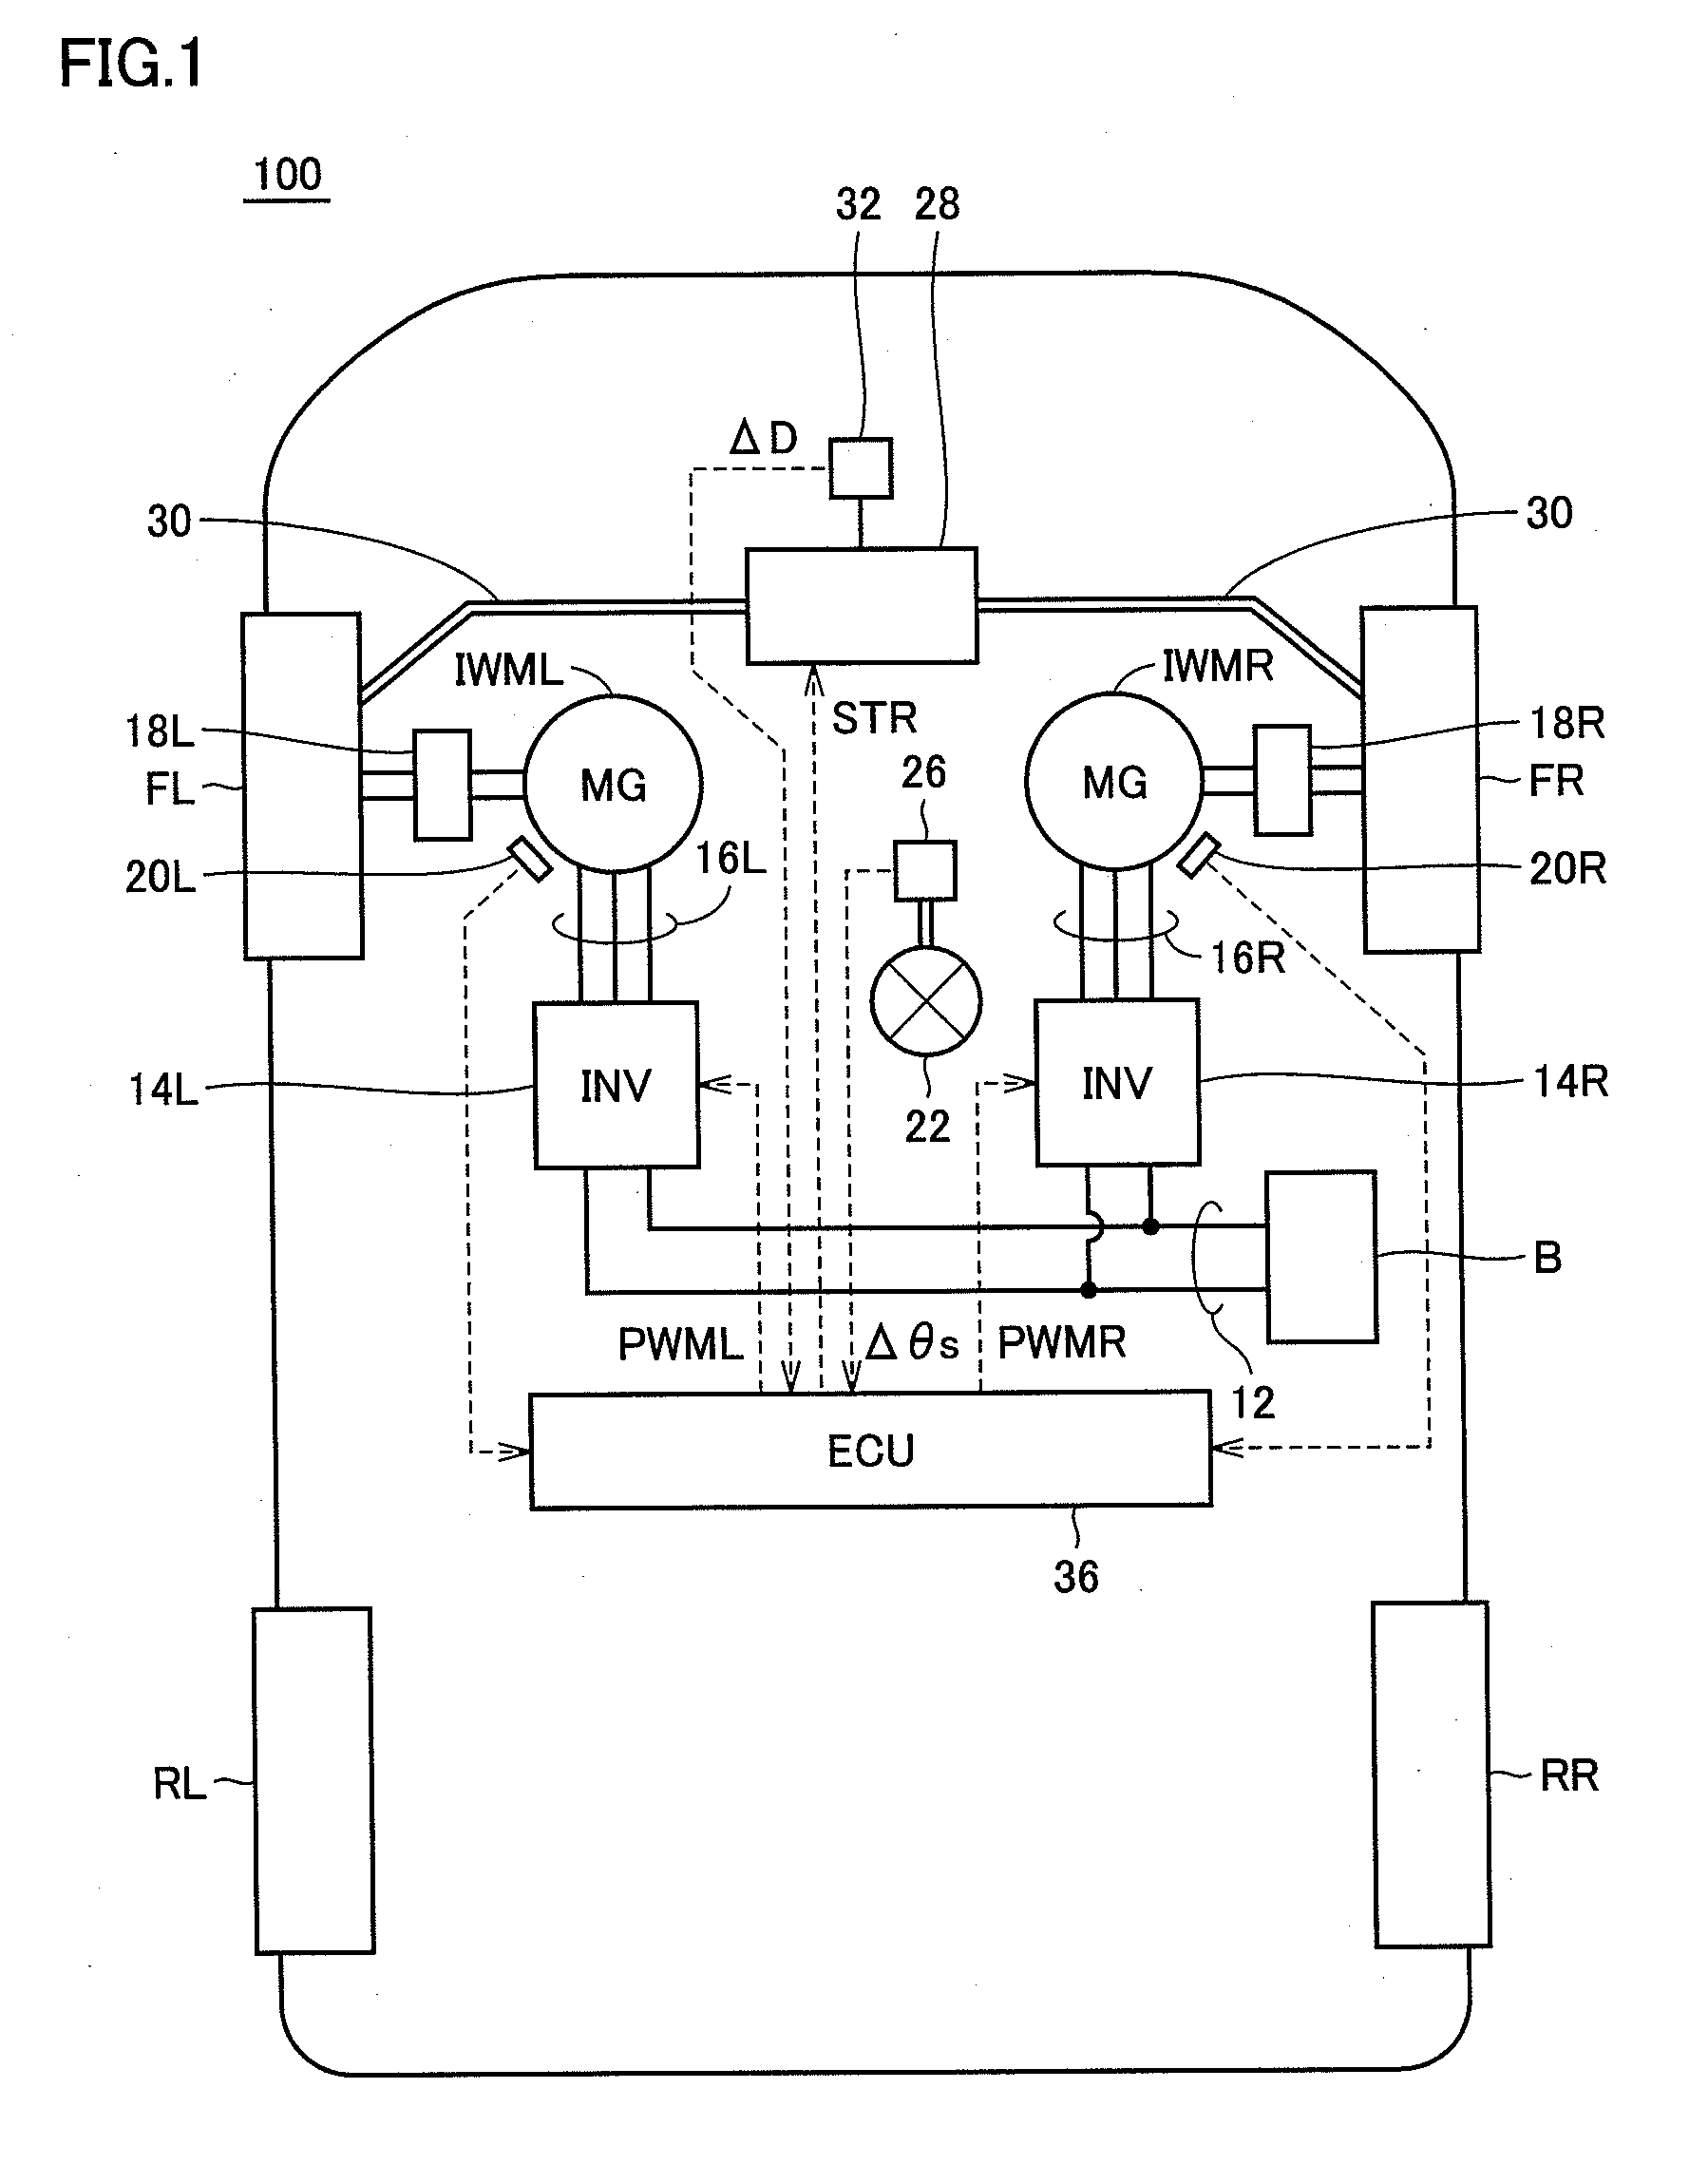 Steering control device and electrically powered vehicle